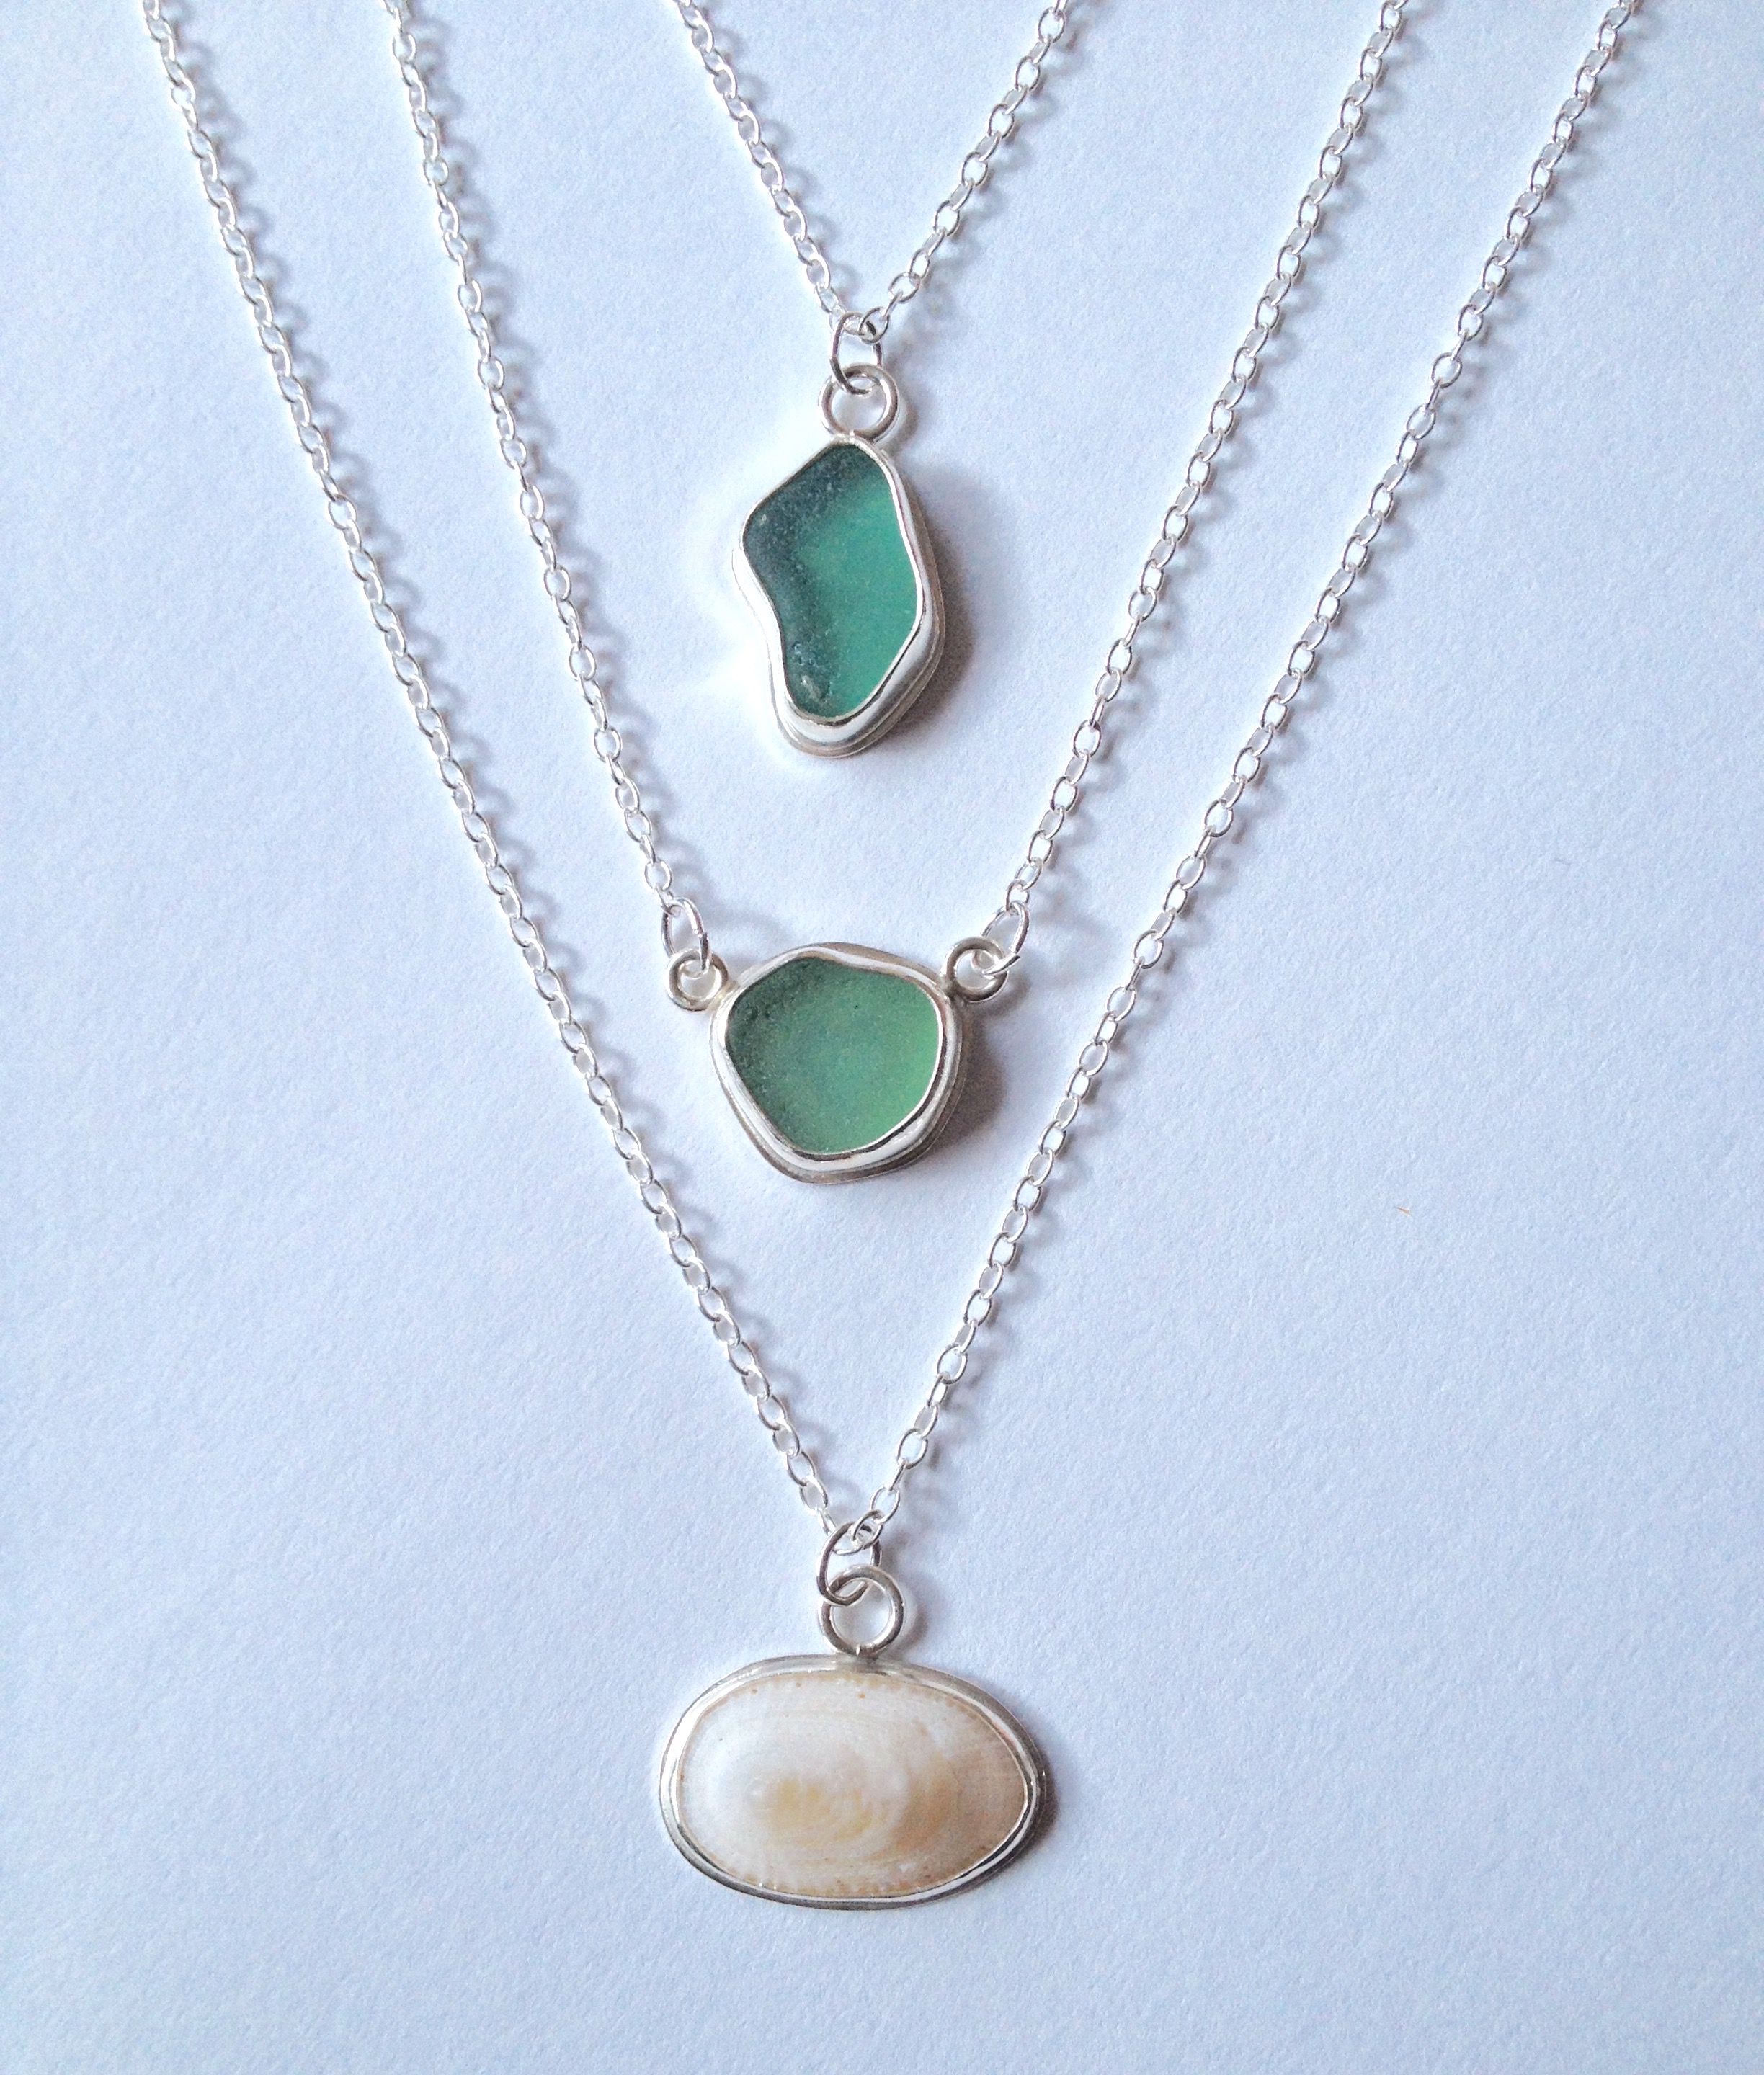 Turquoise Sea Glass Necklace Pair